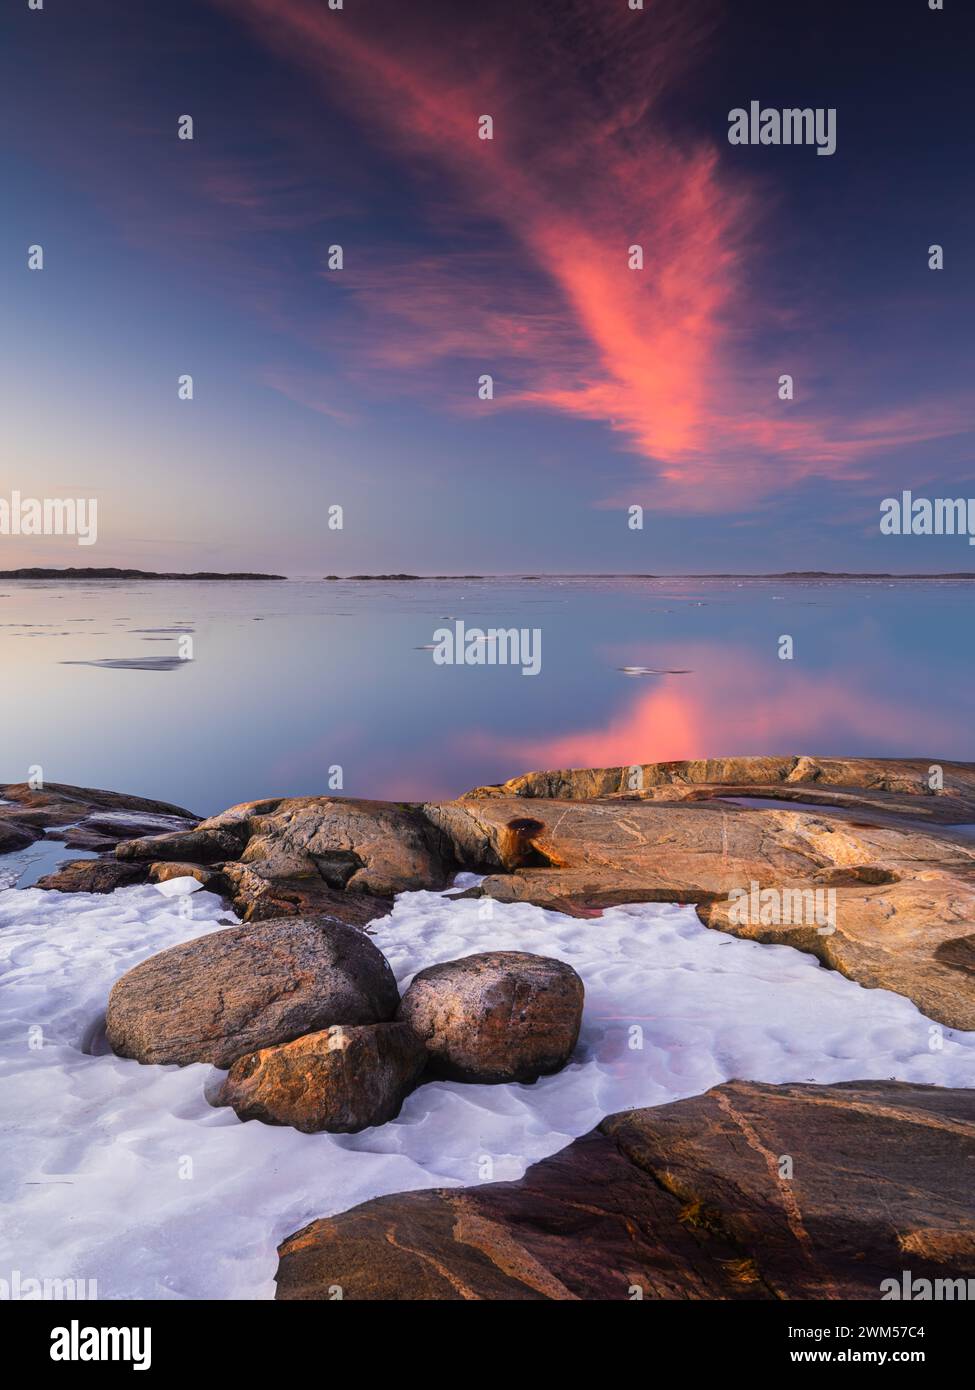 A serene view of Sillvik at sunset with a vibrant display of pink and blue hues in the sky, reflecting upon the tranquil waters. Snow nestles among th Stock Photo